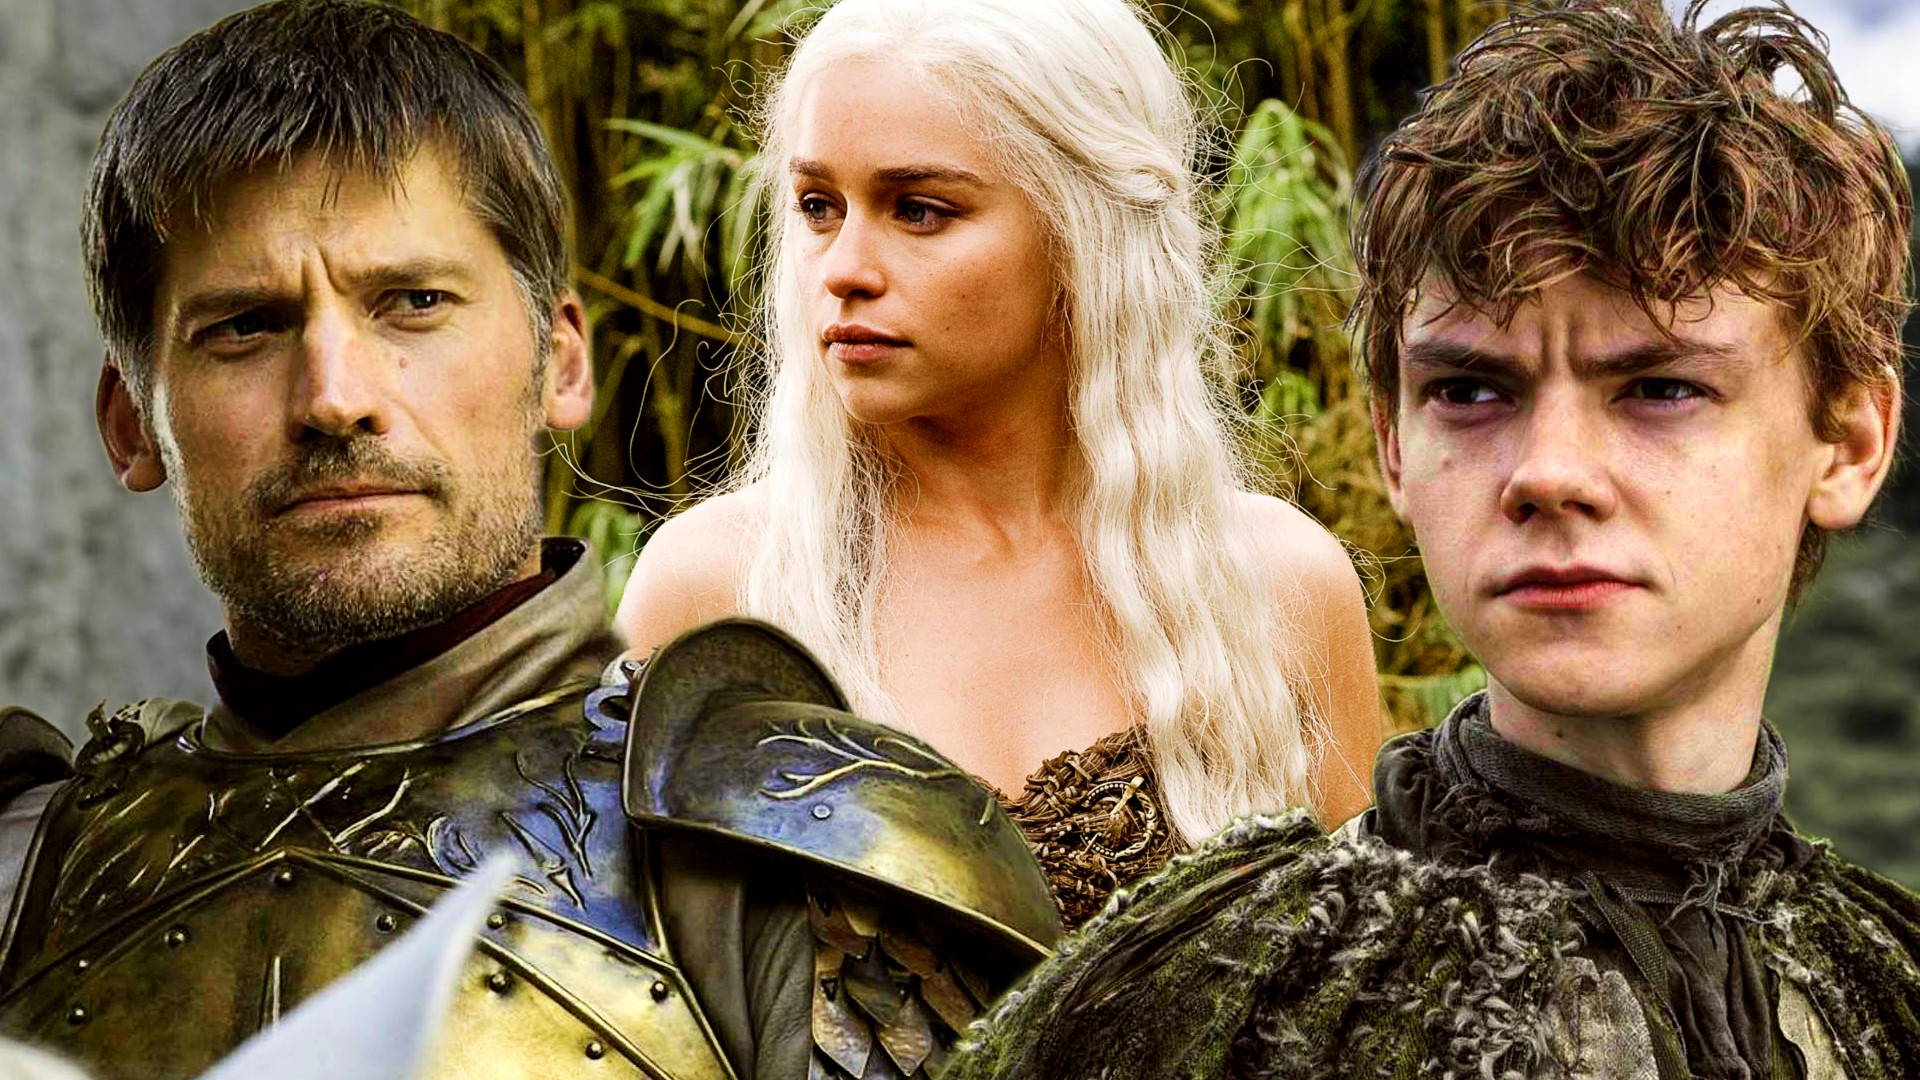 Discover Your Game of Thrones House Based on Myers-Briggs